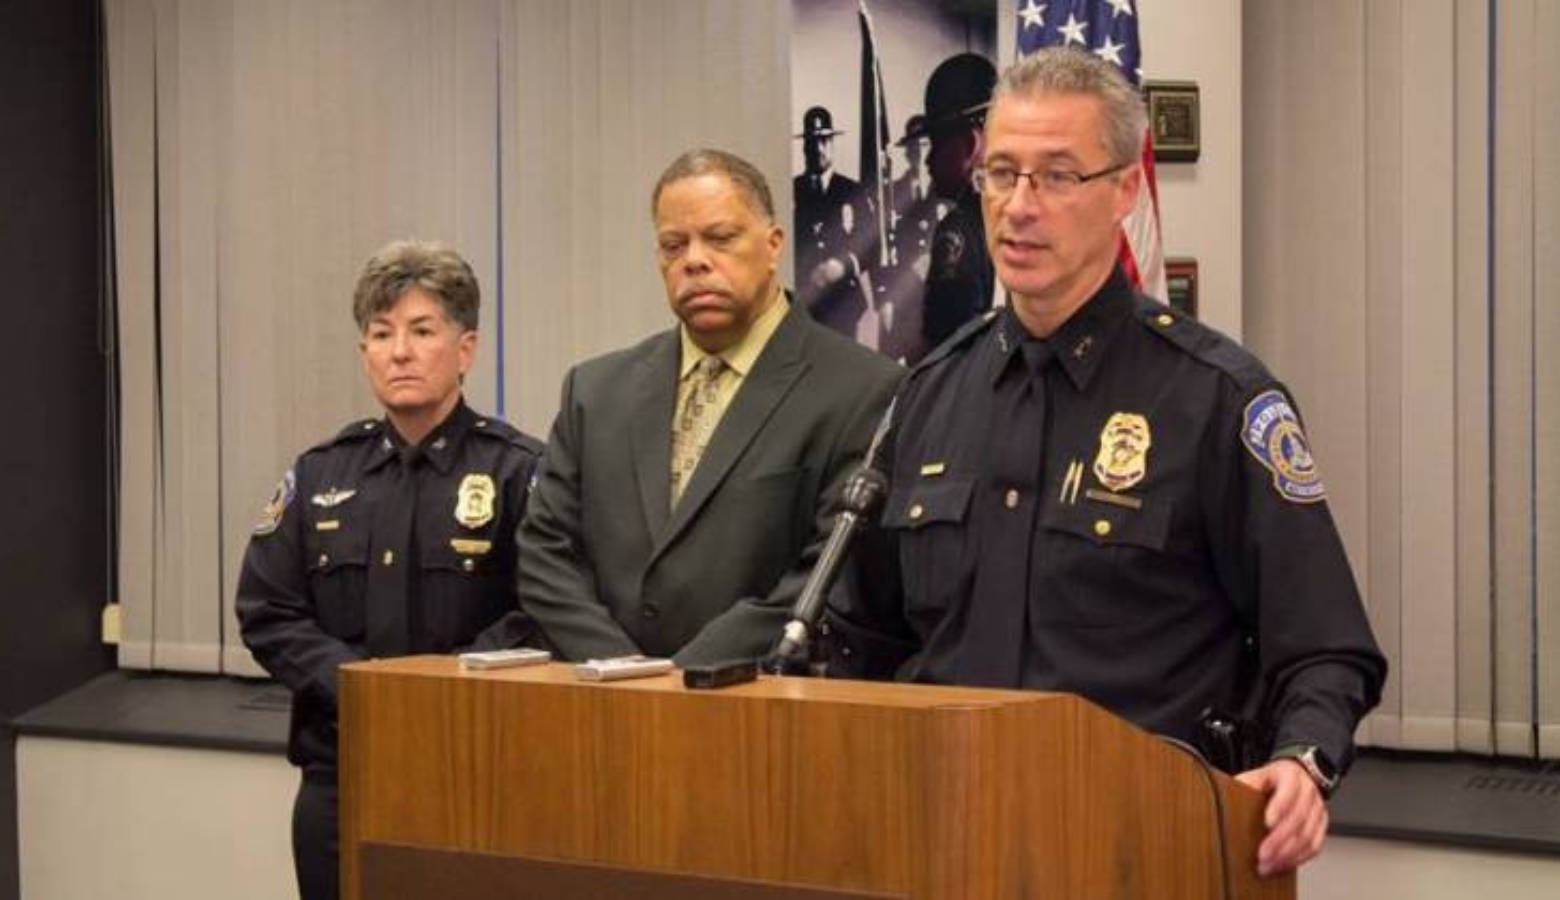 IMPD Chief Bryan Roach recommended the termination of the two officers who shot and killed Aaron Bailey. A merit board voted to clear both men of any violations.